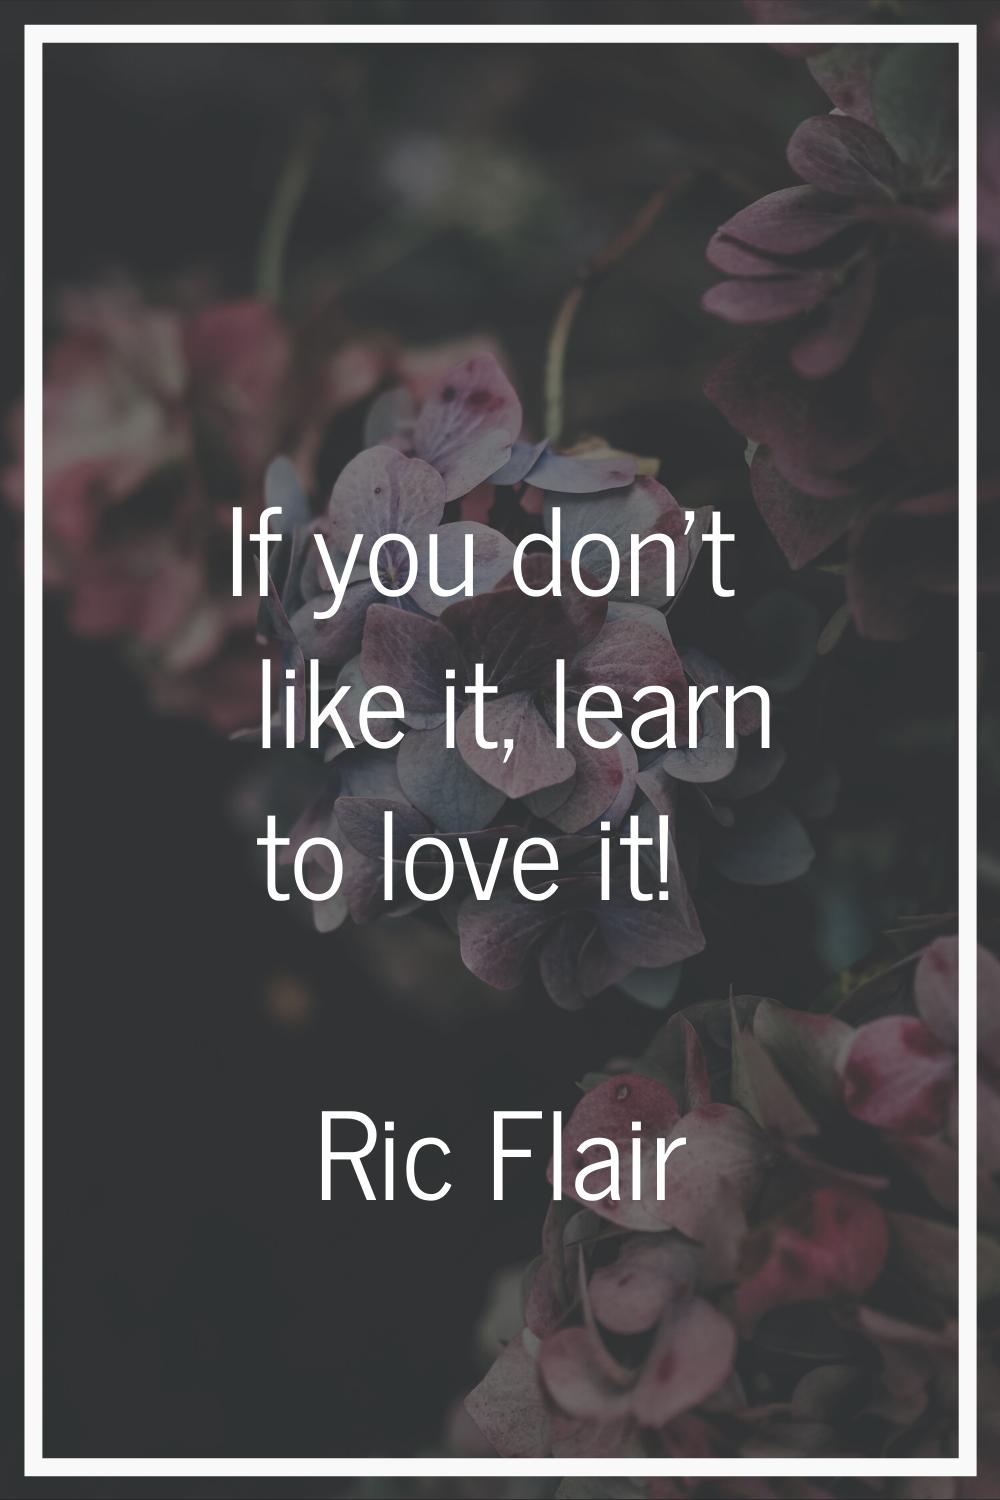 If you don't like it, learn to love it!